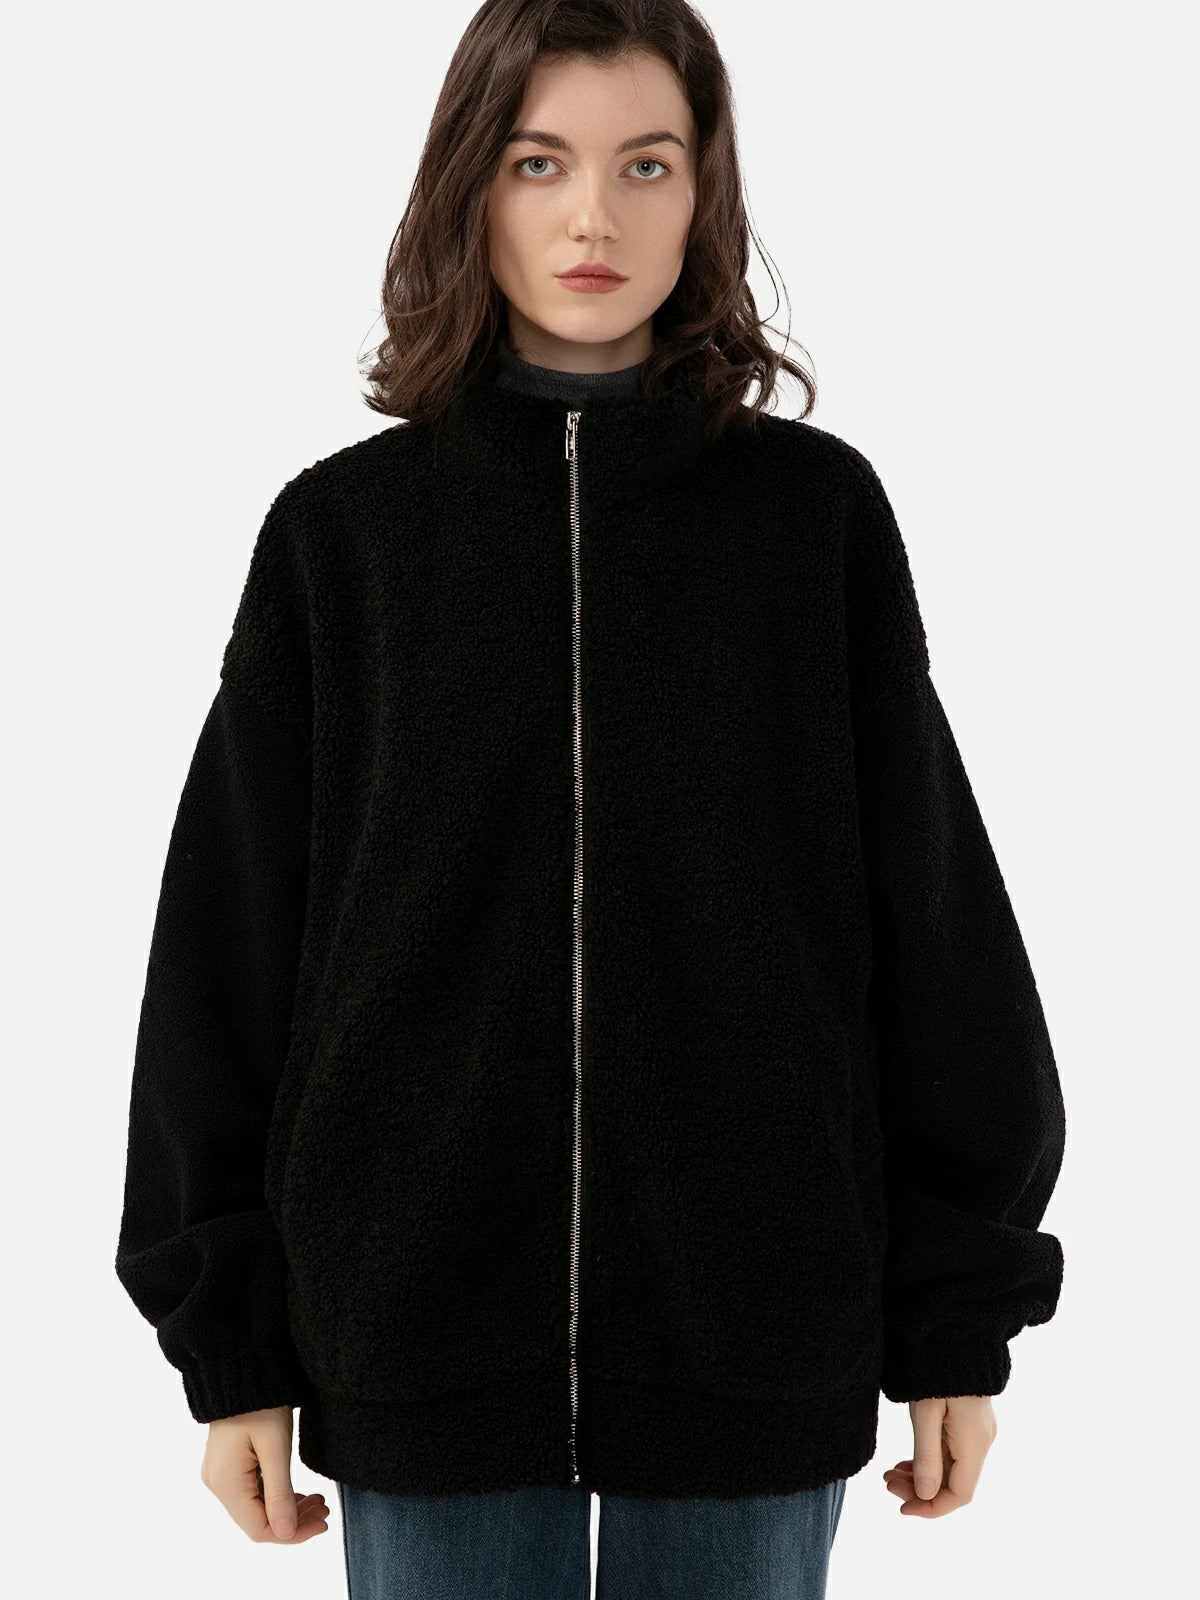 The warmth and stylish look of a black fleece zip jacket